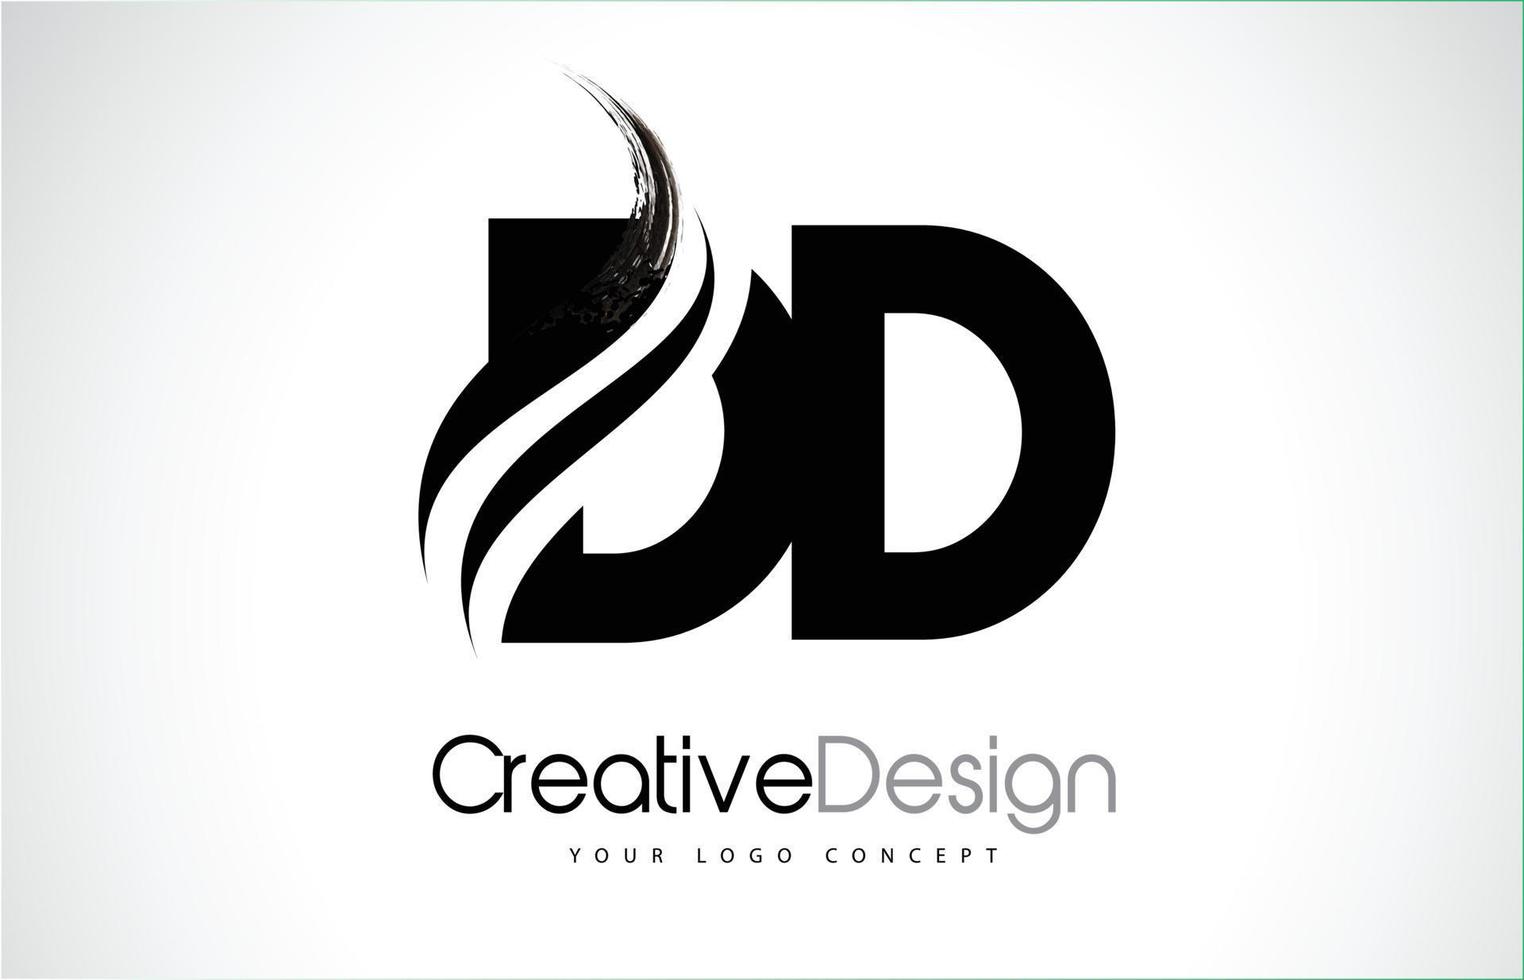 DD D D Creative Brush Black Letters Design With Swoosh vector